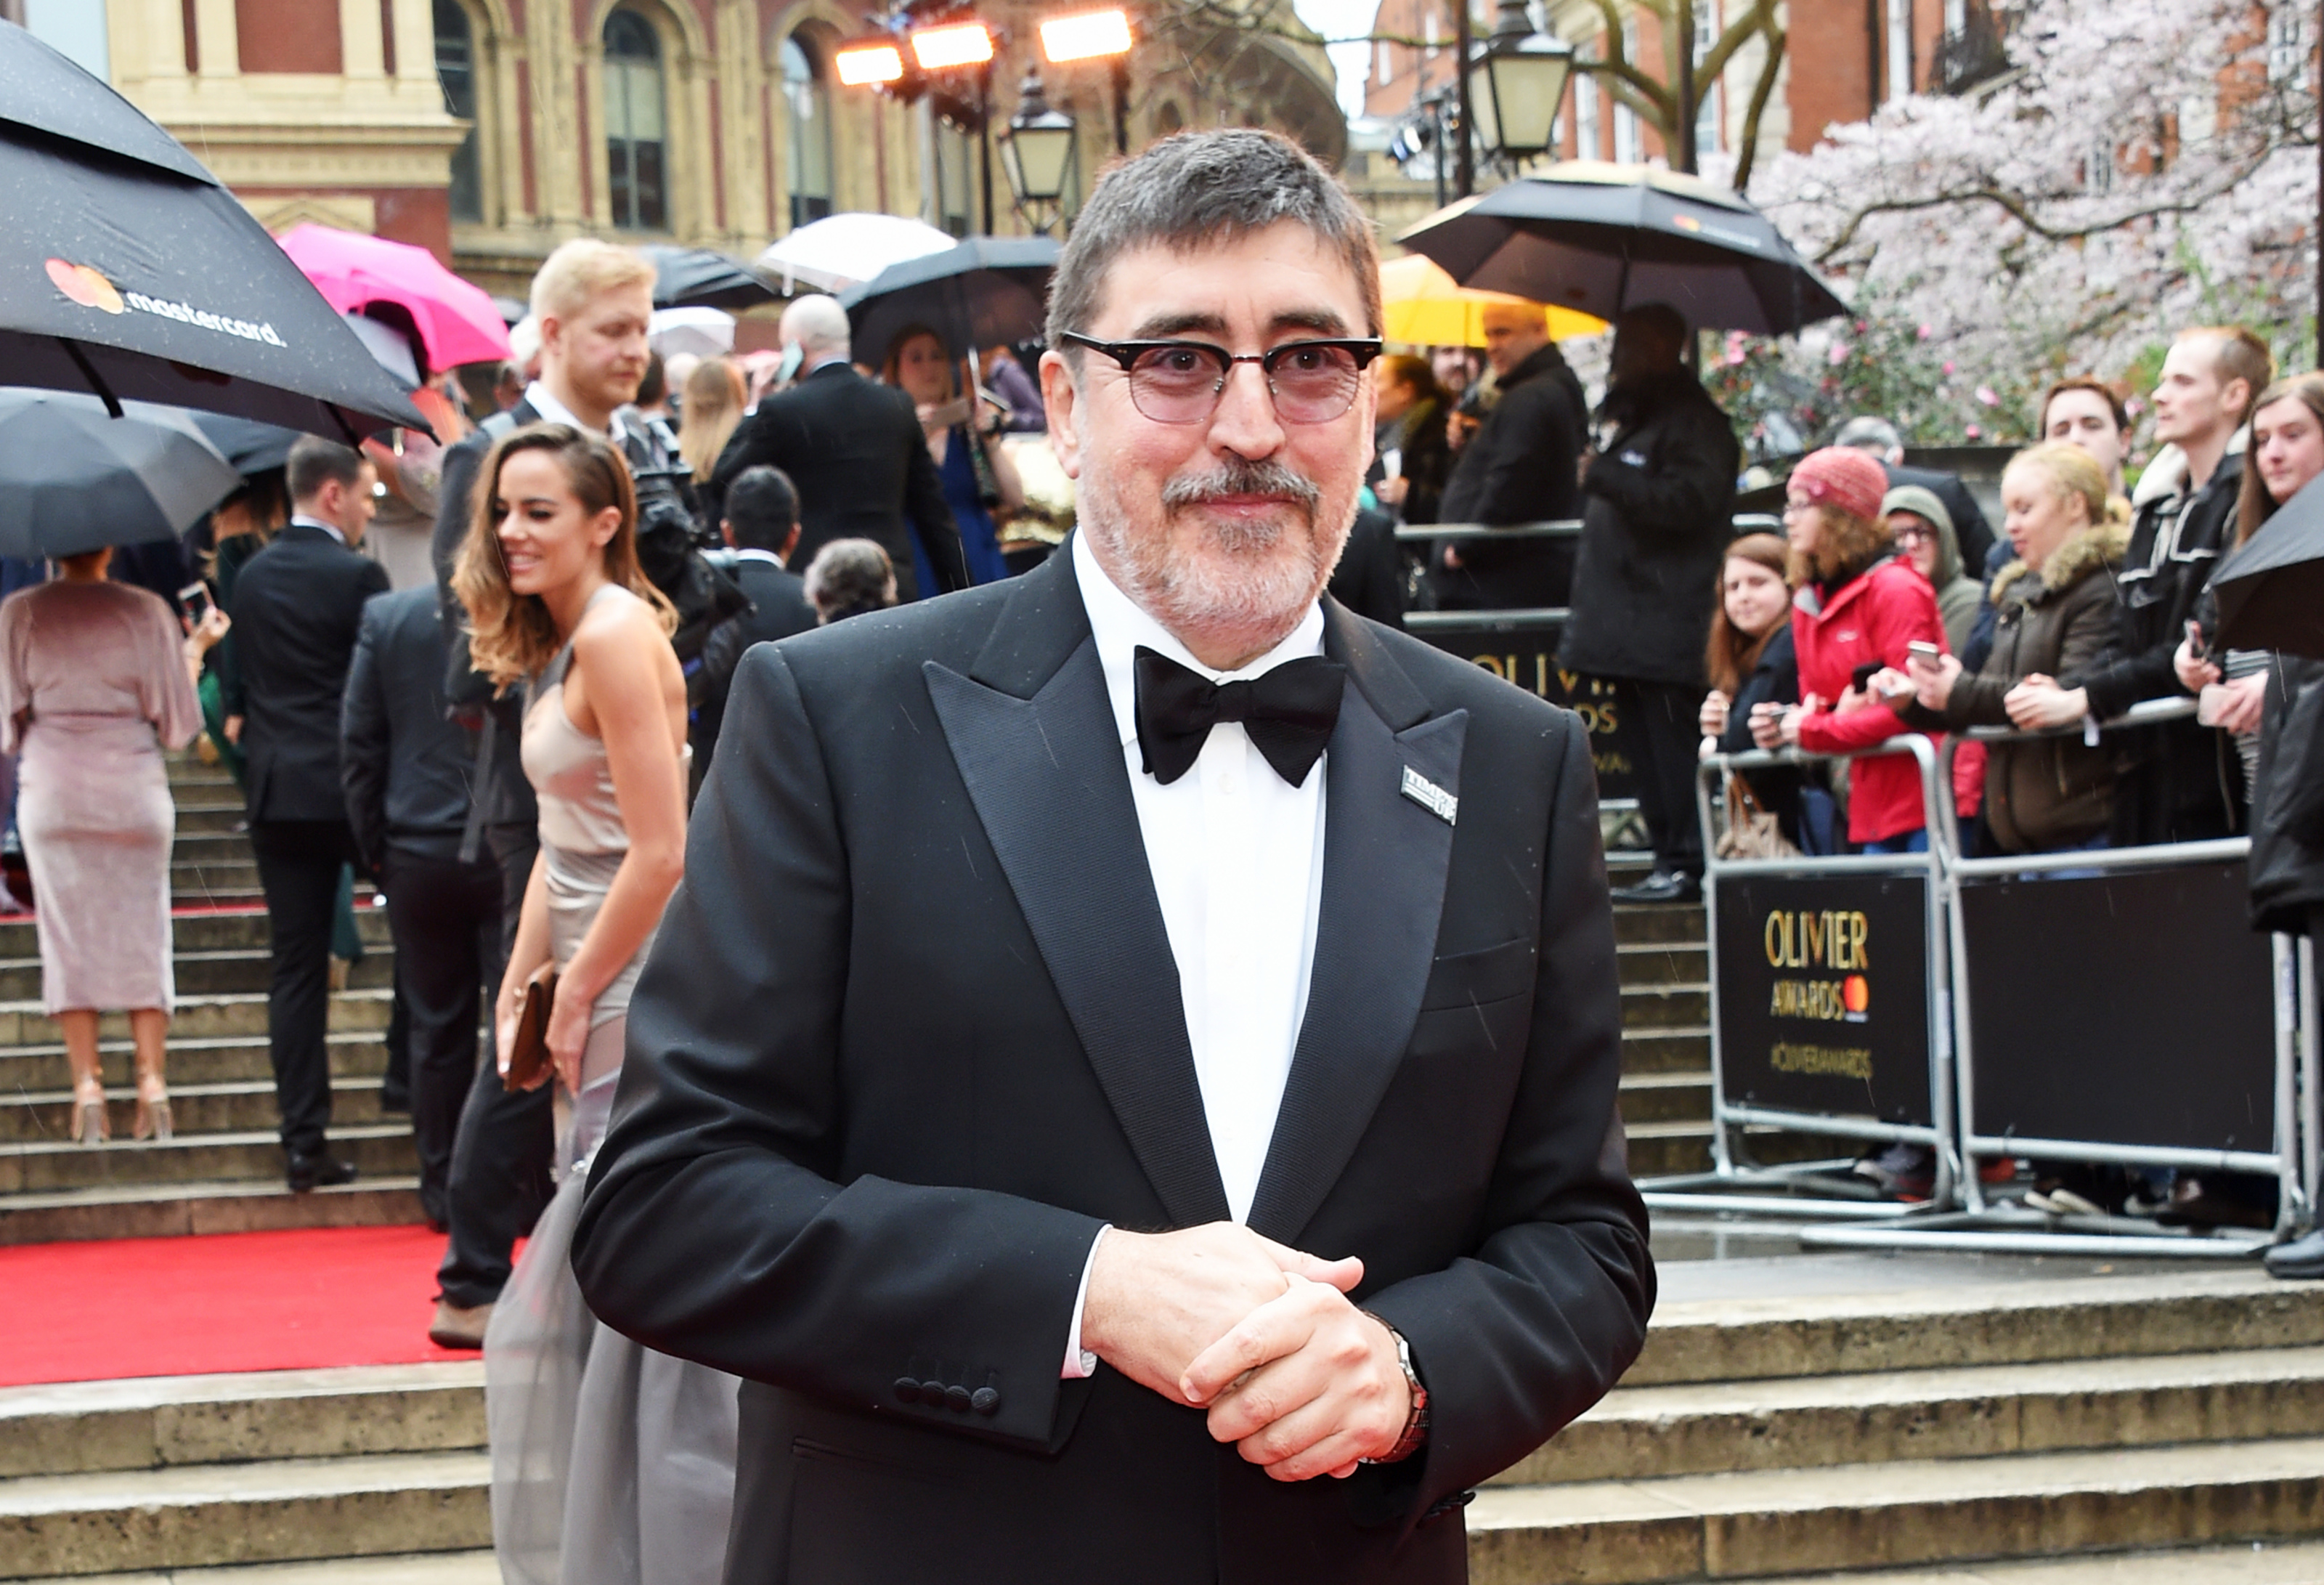 Spider-Man 3': Alfred Molina Returning as Doctor Octopus – The